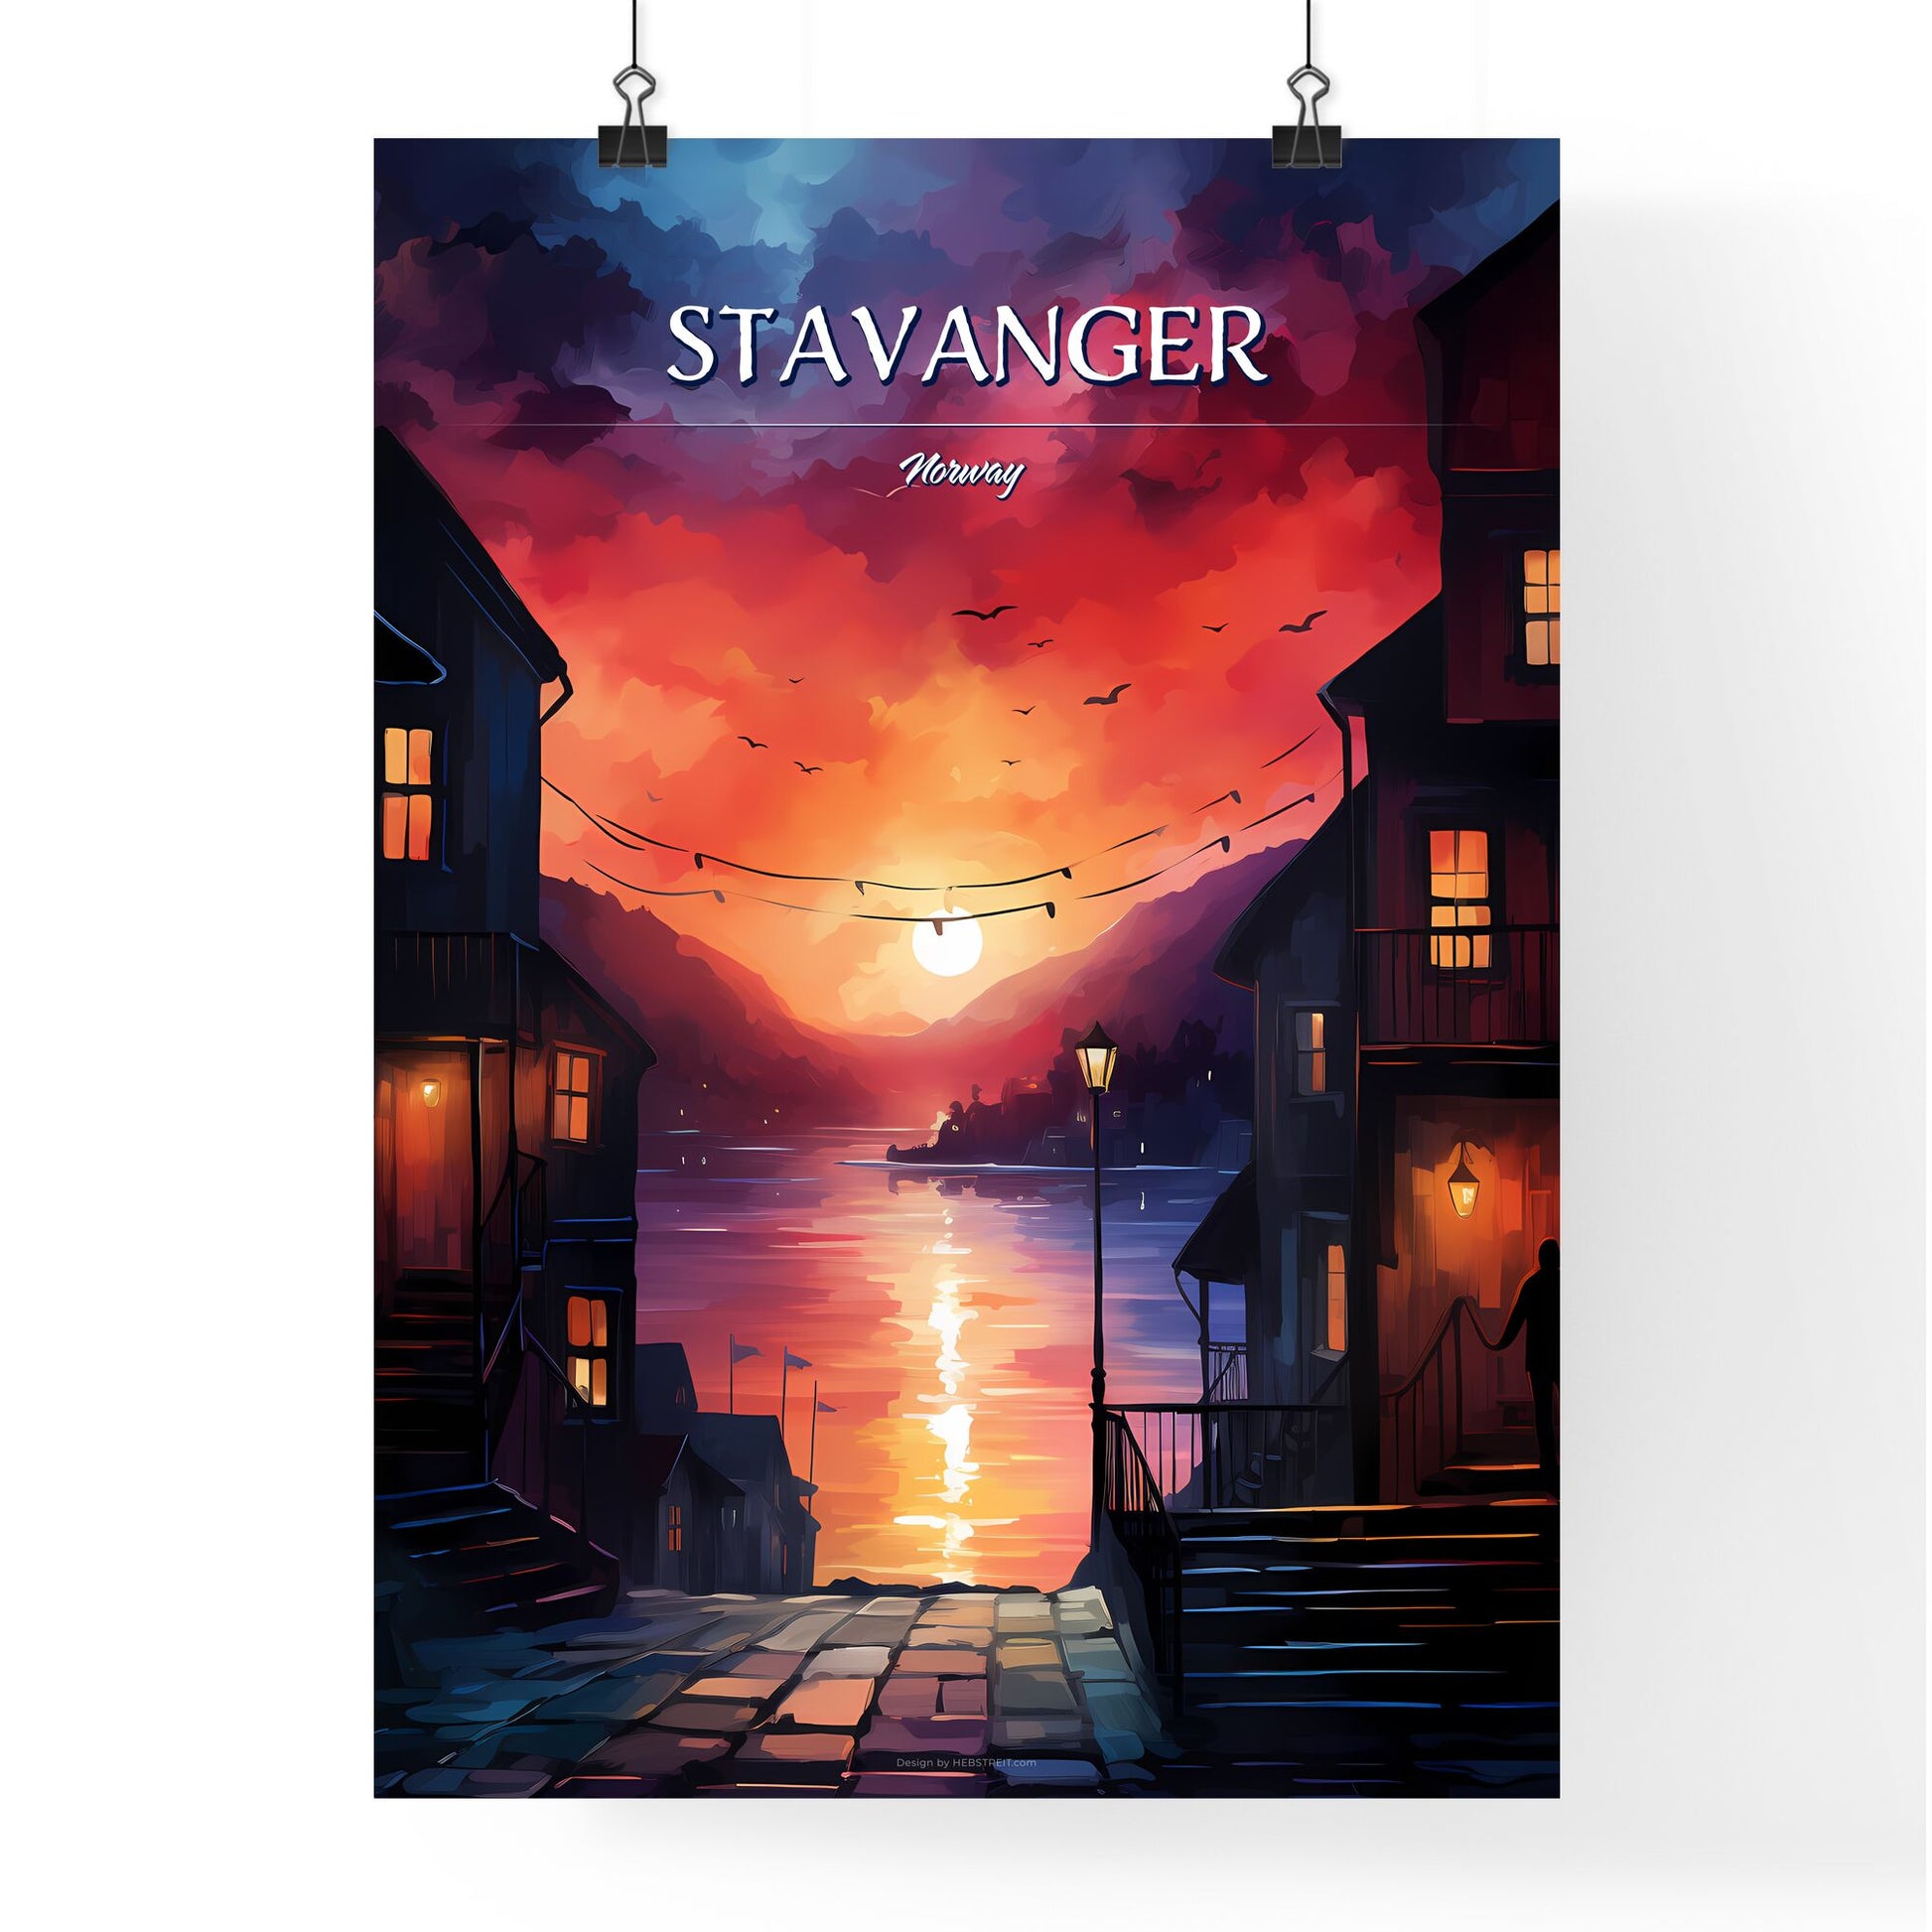 Stavanger, Norway - Art print of a painting of a city with a sunset Default Title